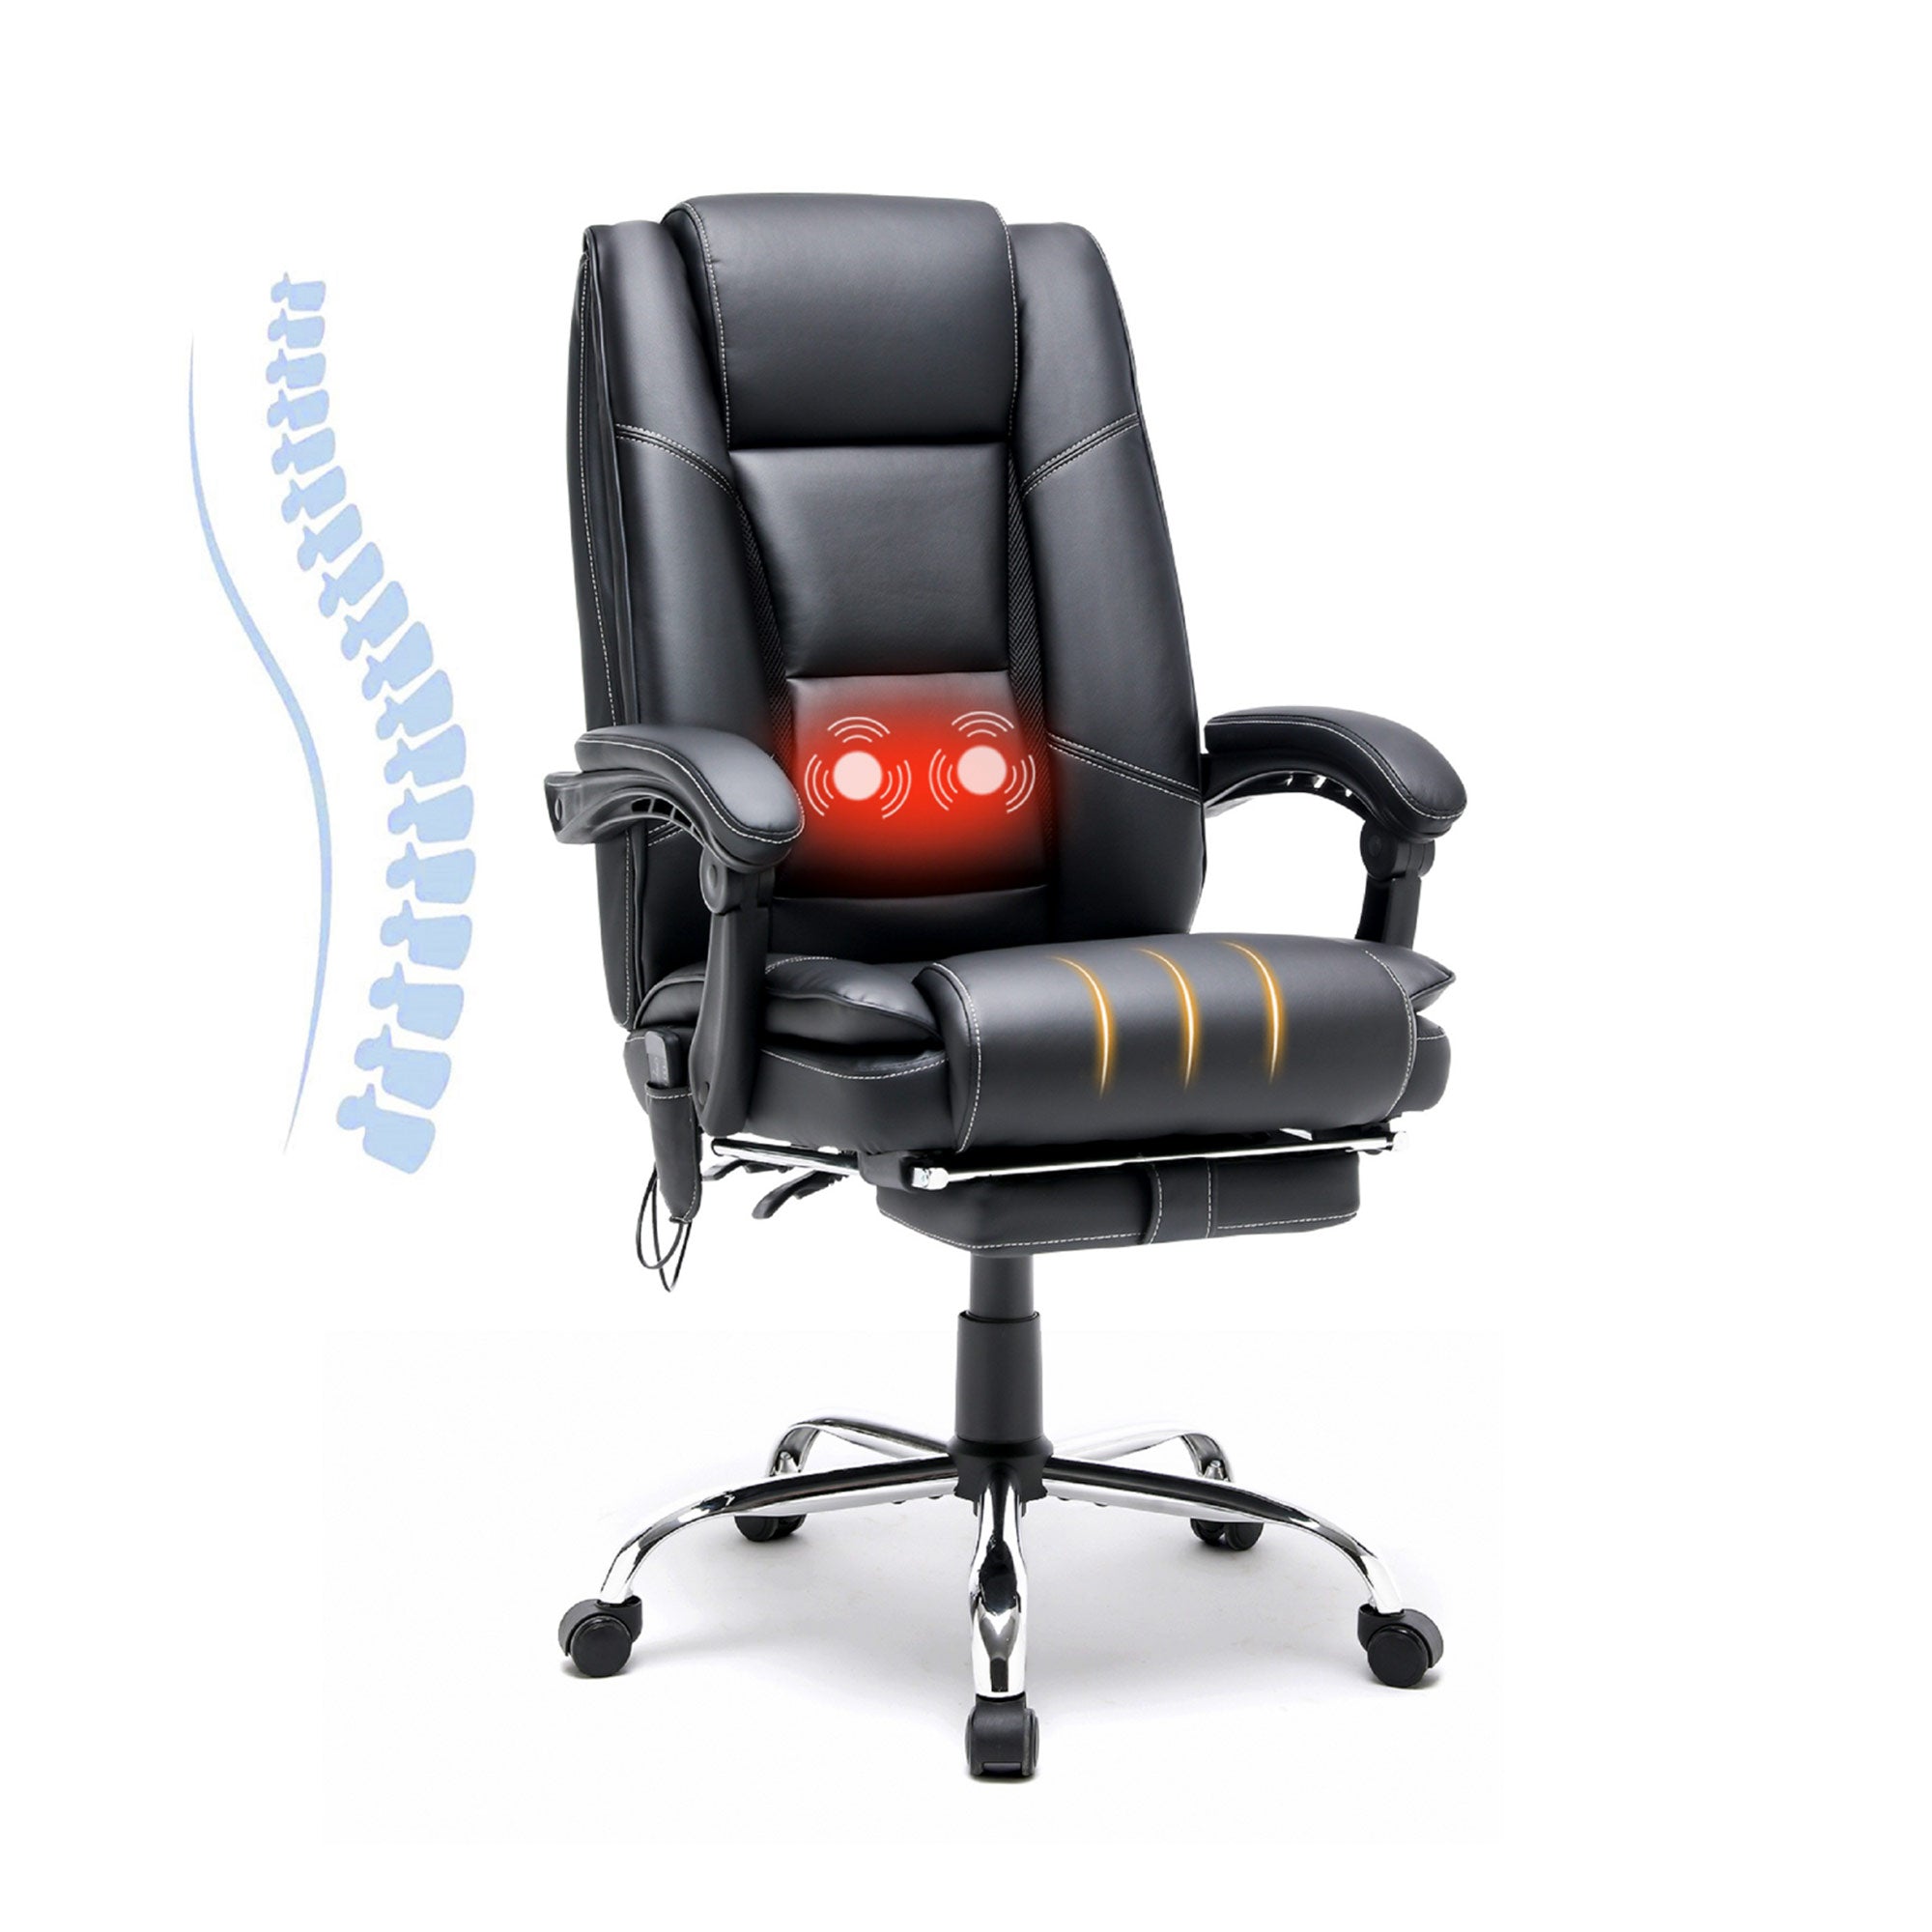 High Back Massage Reclining Office Chair with Footrest - Executive Computer Chair Home Office Desk Chair with Massaging Lumbar Cushion, Adjustable